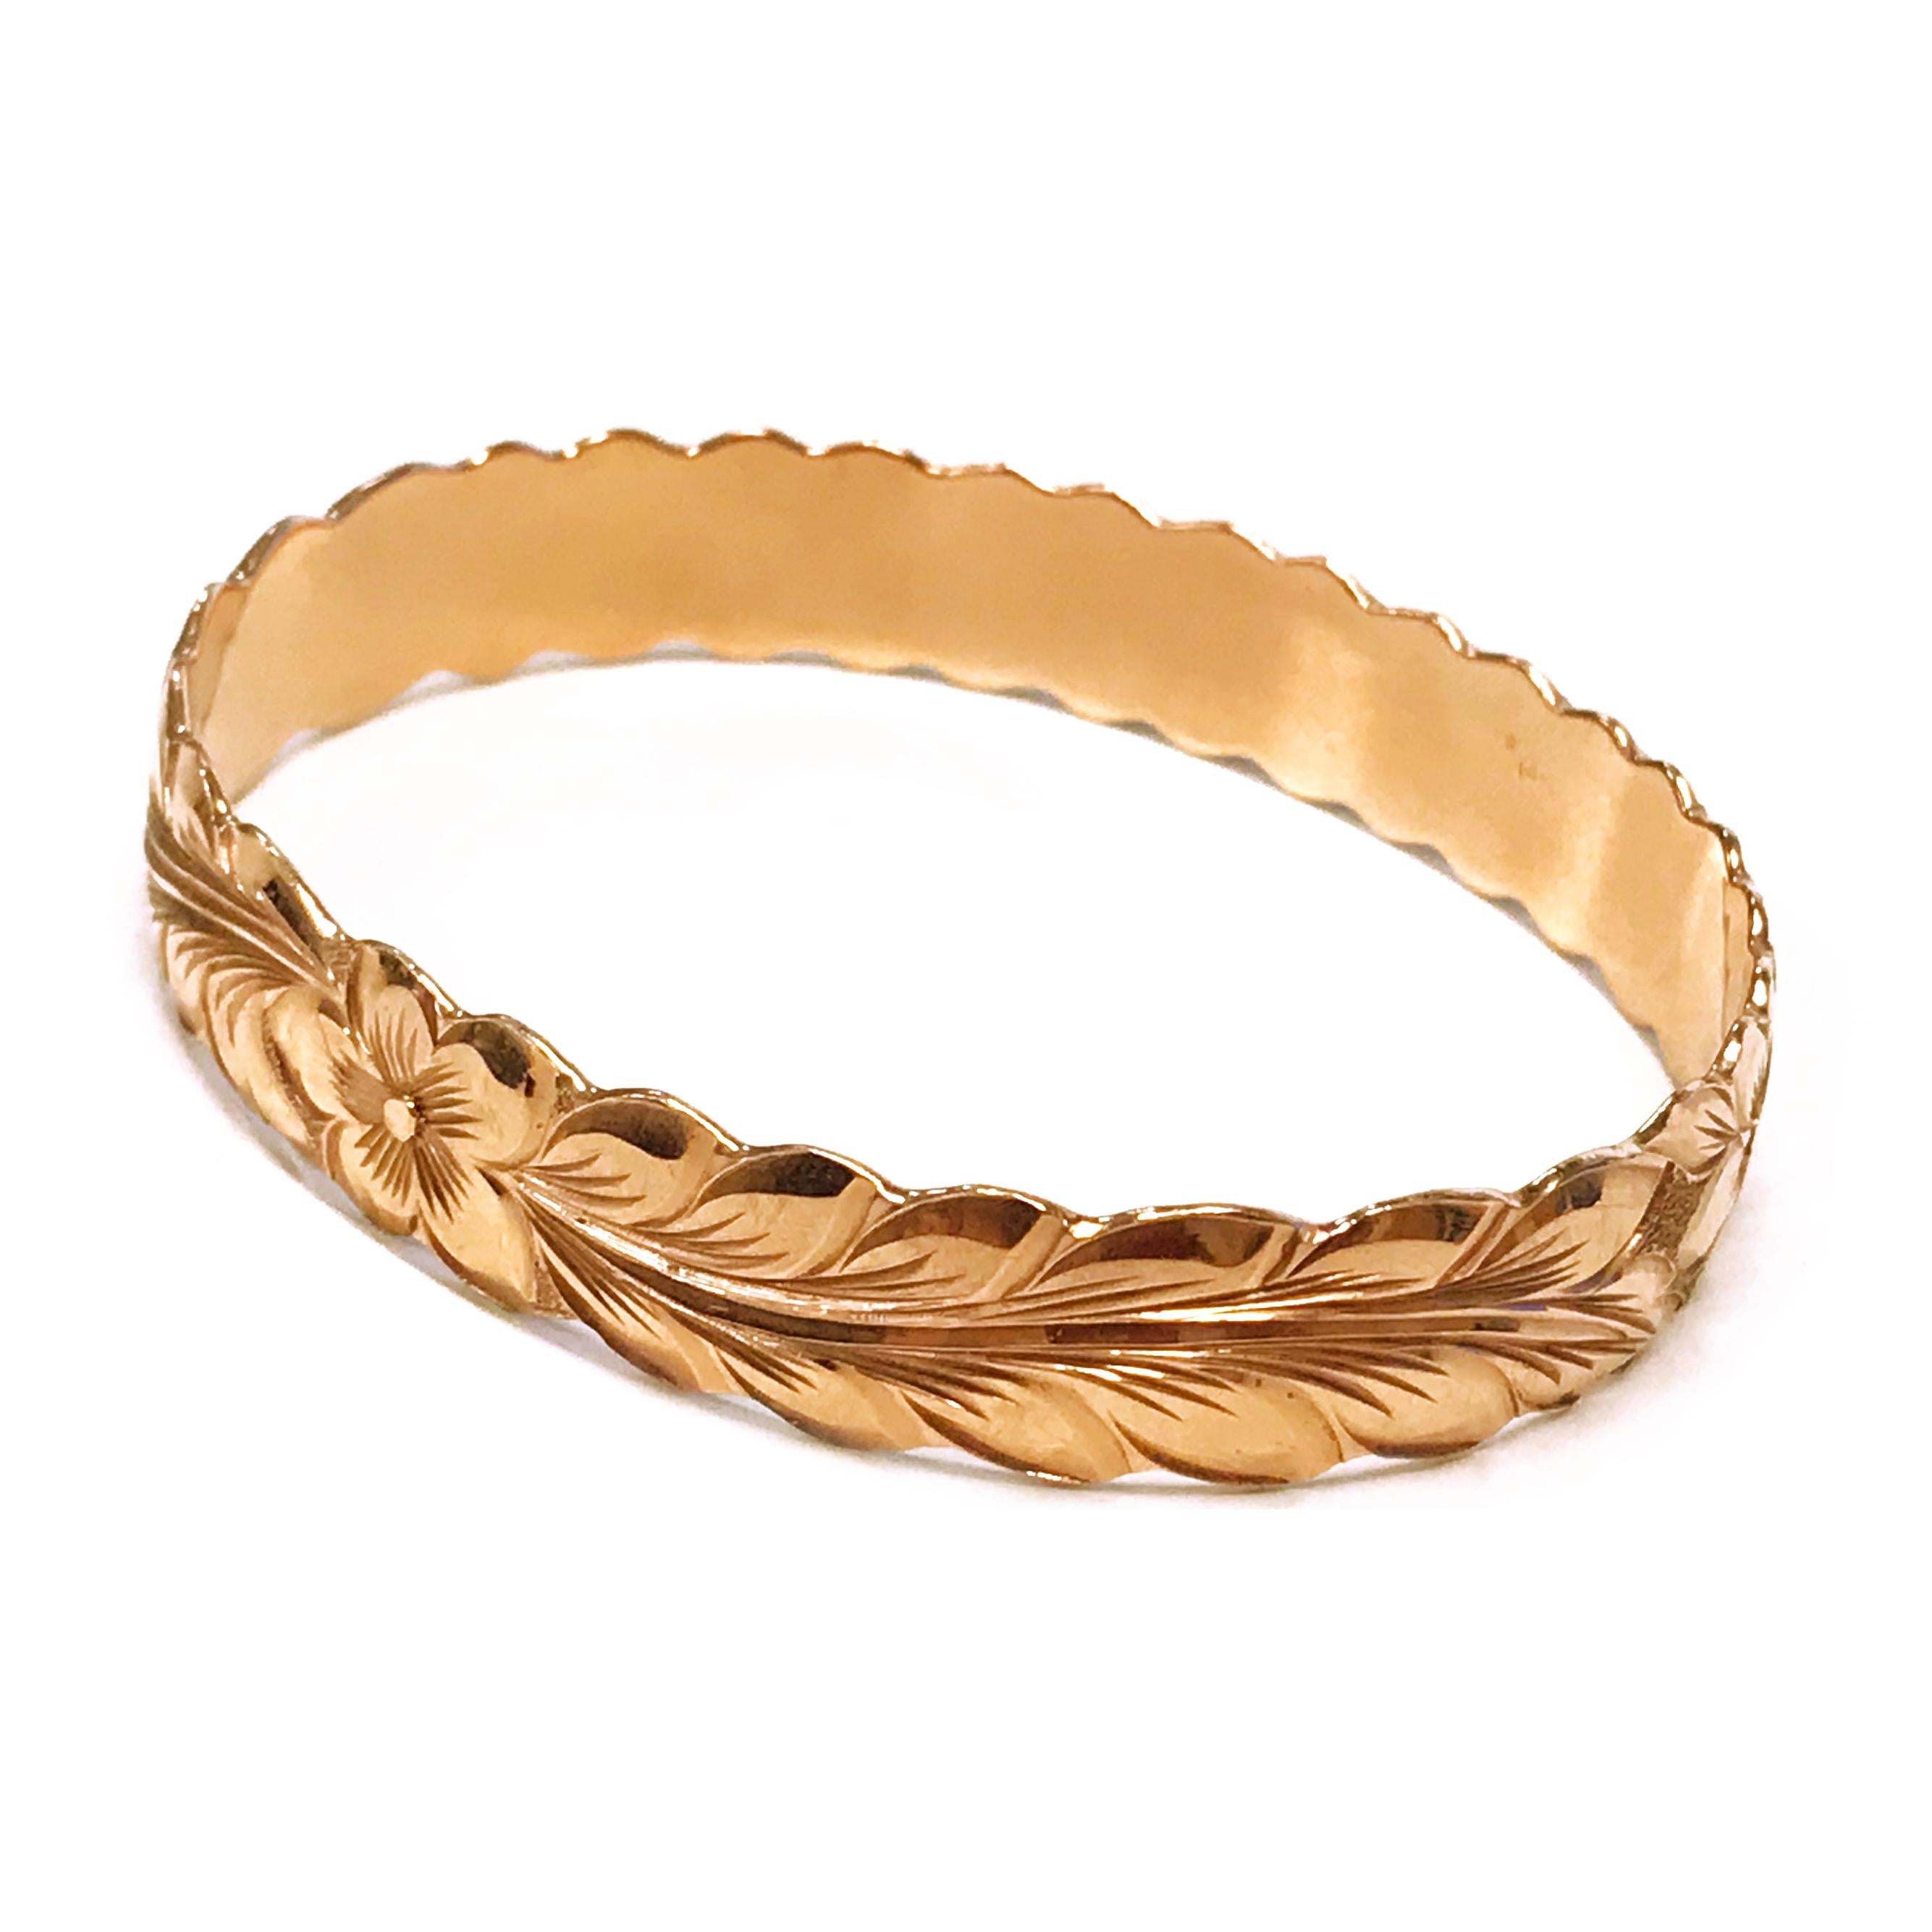 14 Karat Rose Gold Floral Bangle Bracelet. The Hawaiian bangle features a hand-engraved five-petal Plumeria flower at the center of one side with leaves encompassing the side of the bangle and eight Plumeria flowers on the other side, smooth finish